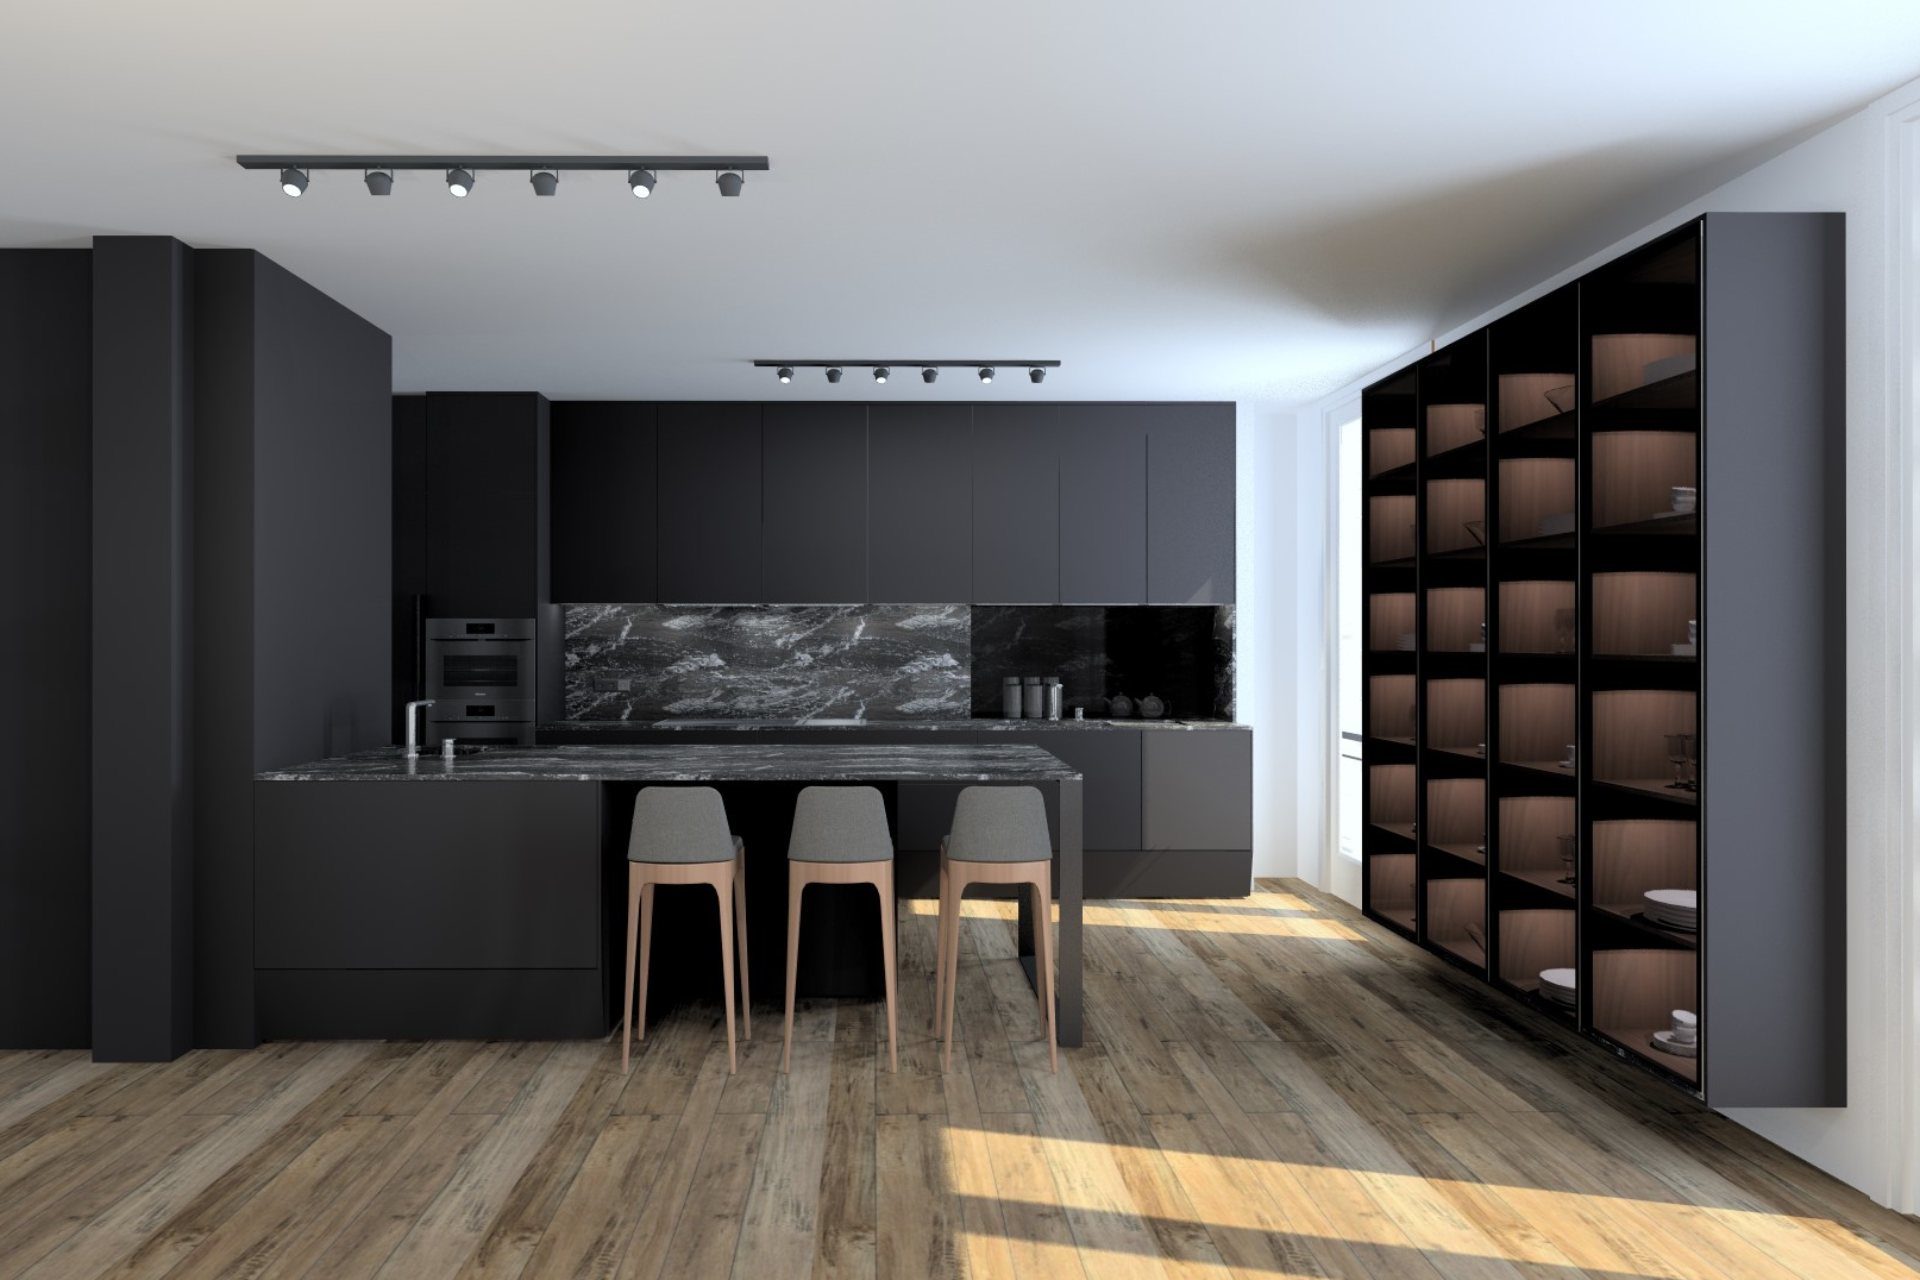 L-shaped kitchen in black and grey tones with a cabinet